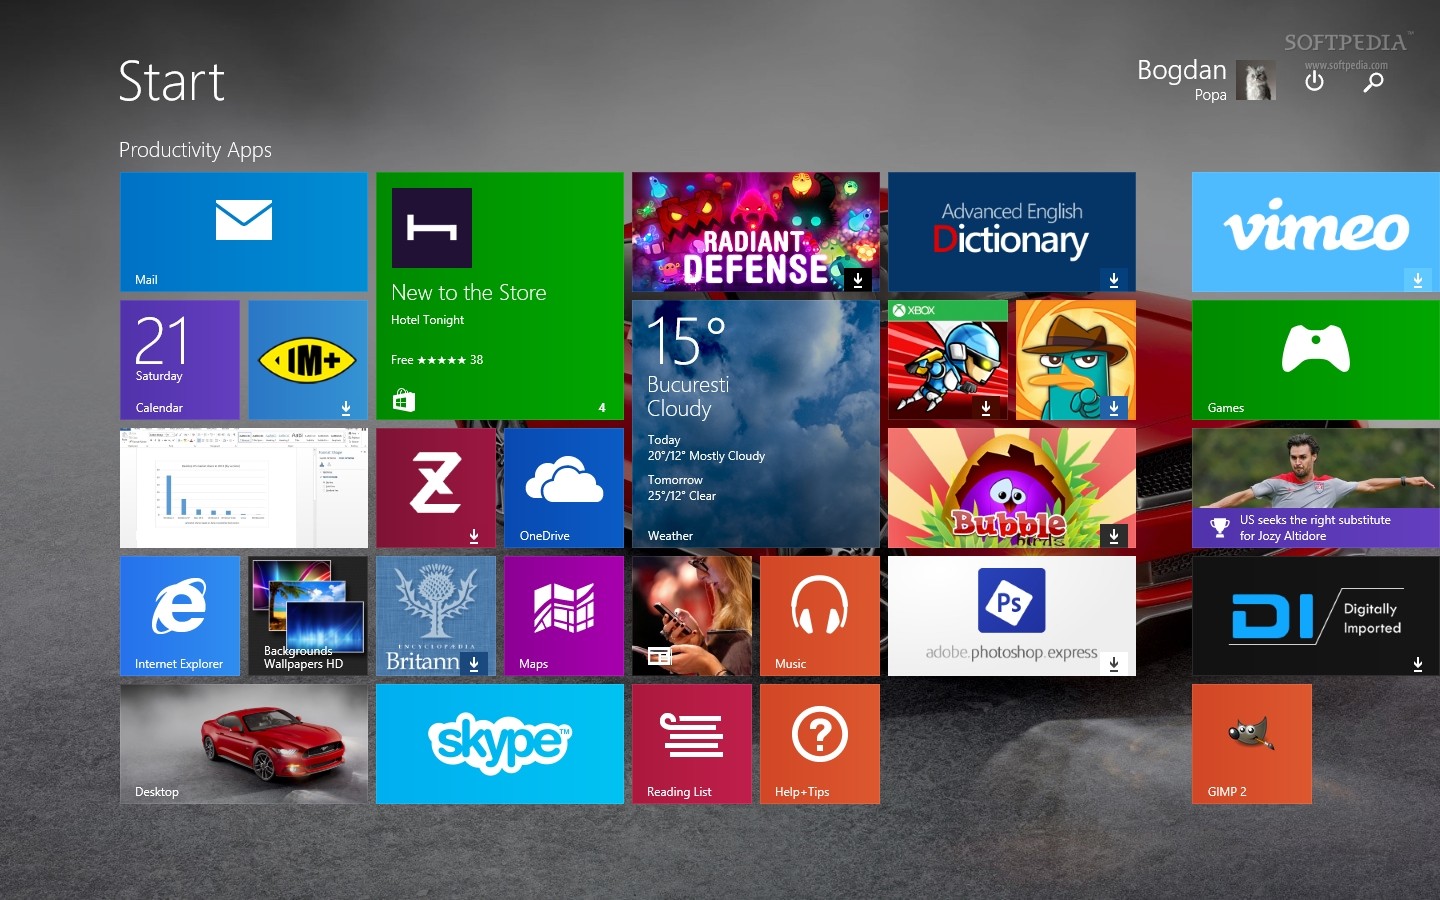 Windows 9 Completely Free for Users Buying Windows 8.1 Update 2 – Report